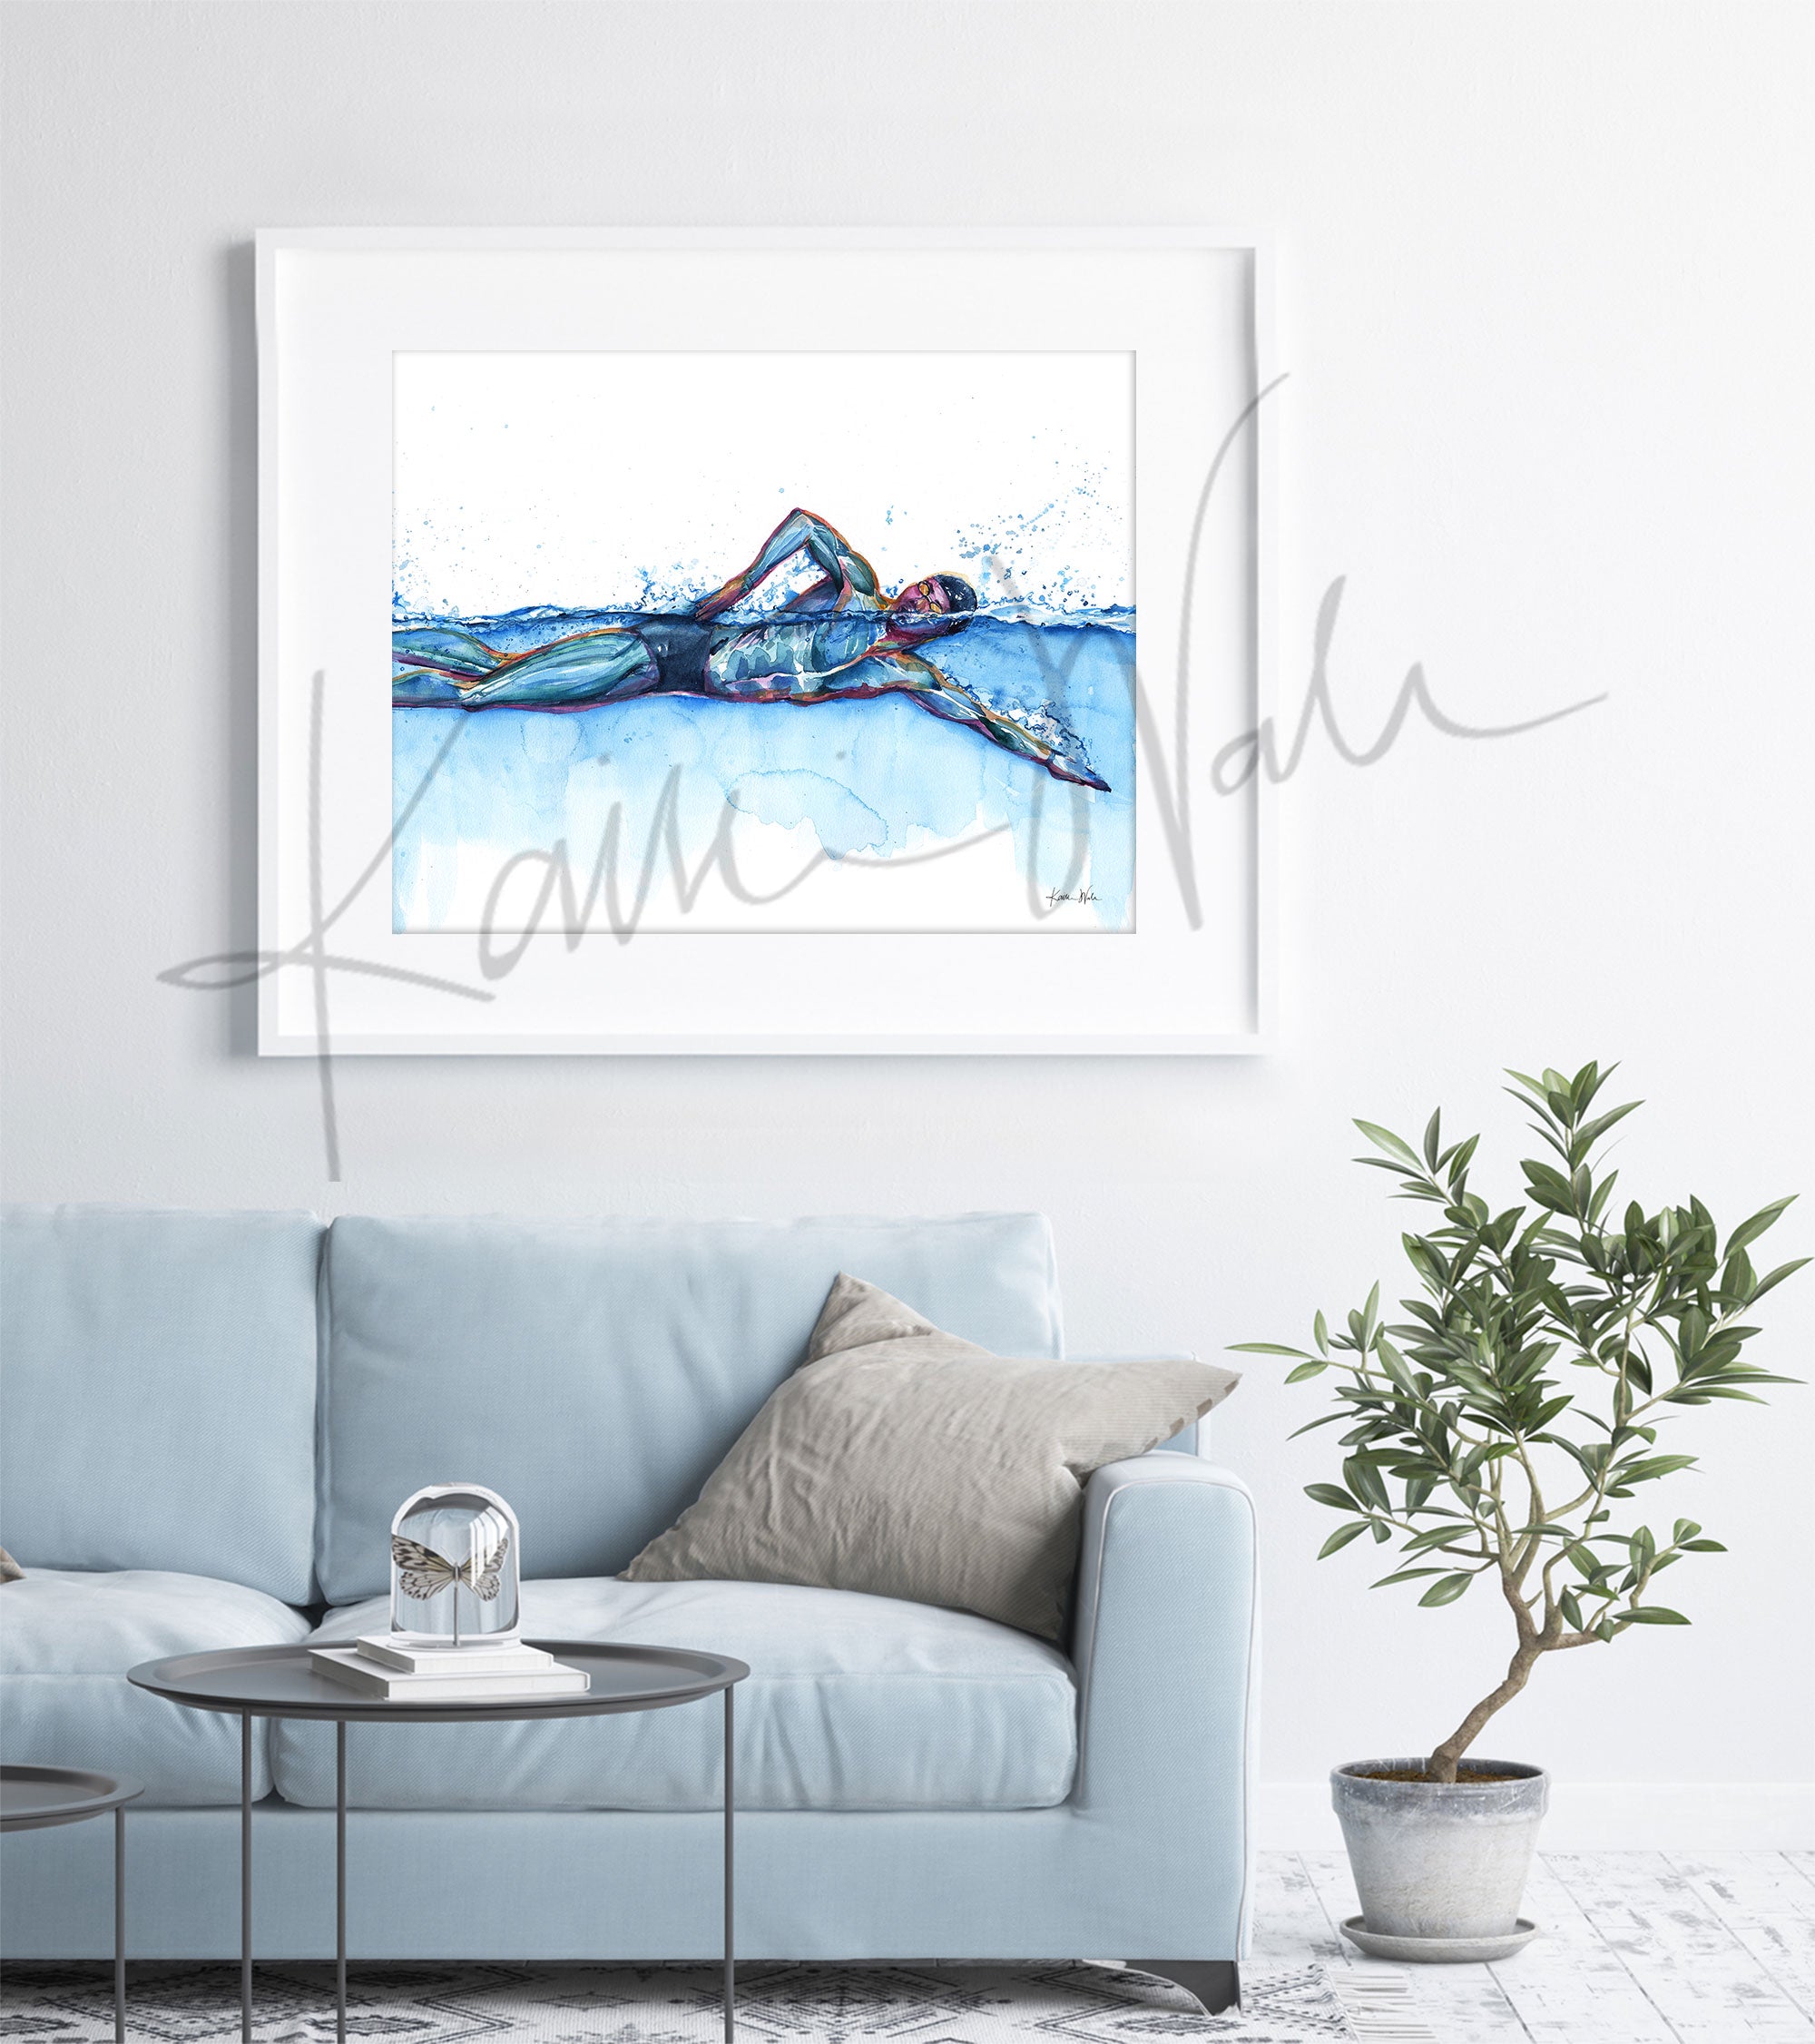 Framed watercolor painting of a swimmer in mid stroke showing the swimmer’s muscular anatomy. The painting is hanging over a blue couch.